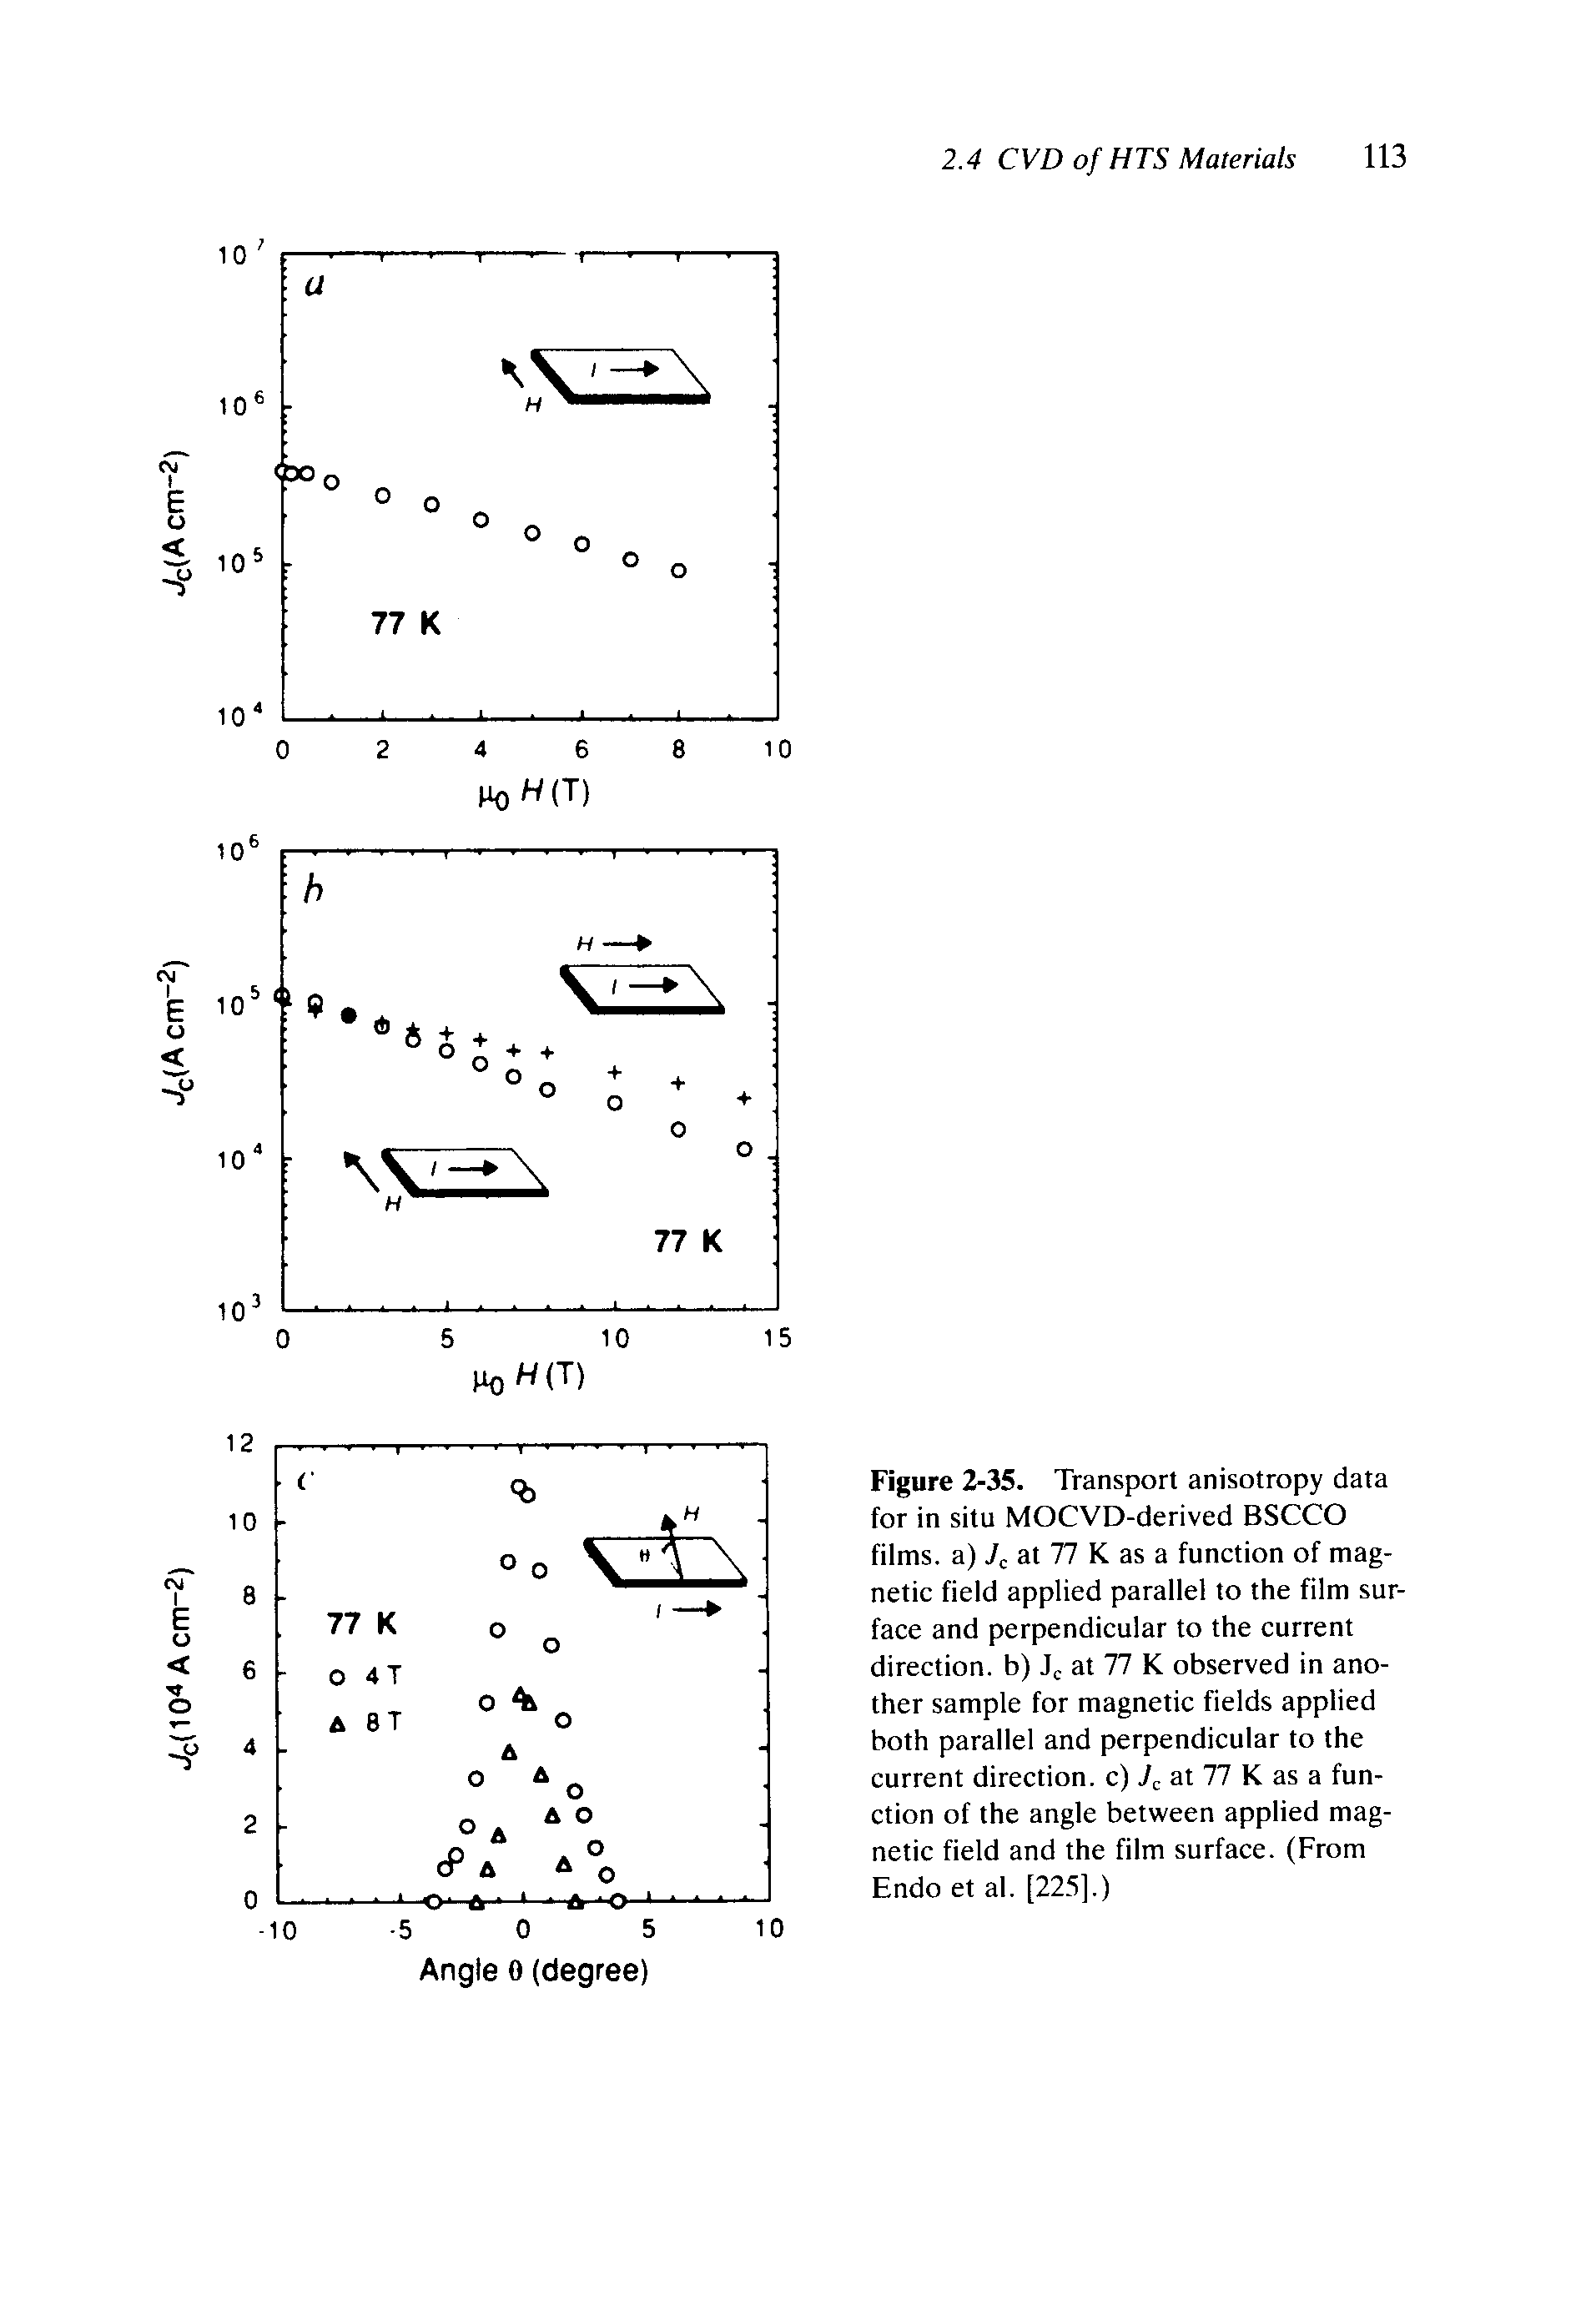 Figure 2-35. Transport anisotropy data for in situ MOCVD-derived BSCCO films, a) 7c at 77 K as a function of magnetic field applied parallel to the film surface and perpendicular to the current direction, b) at 77 K observed in another sample for magnetic fields applied both parallel and perpendicular to the current direction, c) at 77 K as a function of the angle between applied magnetic field and the film surface. (From Endo et al. [225].)...